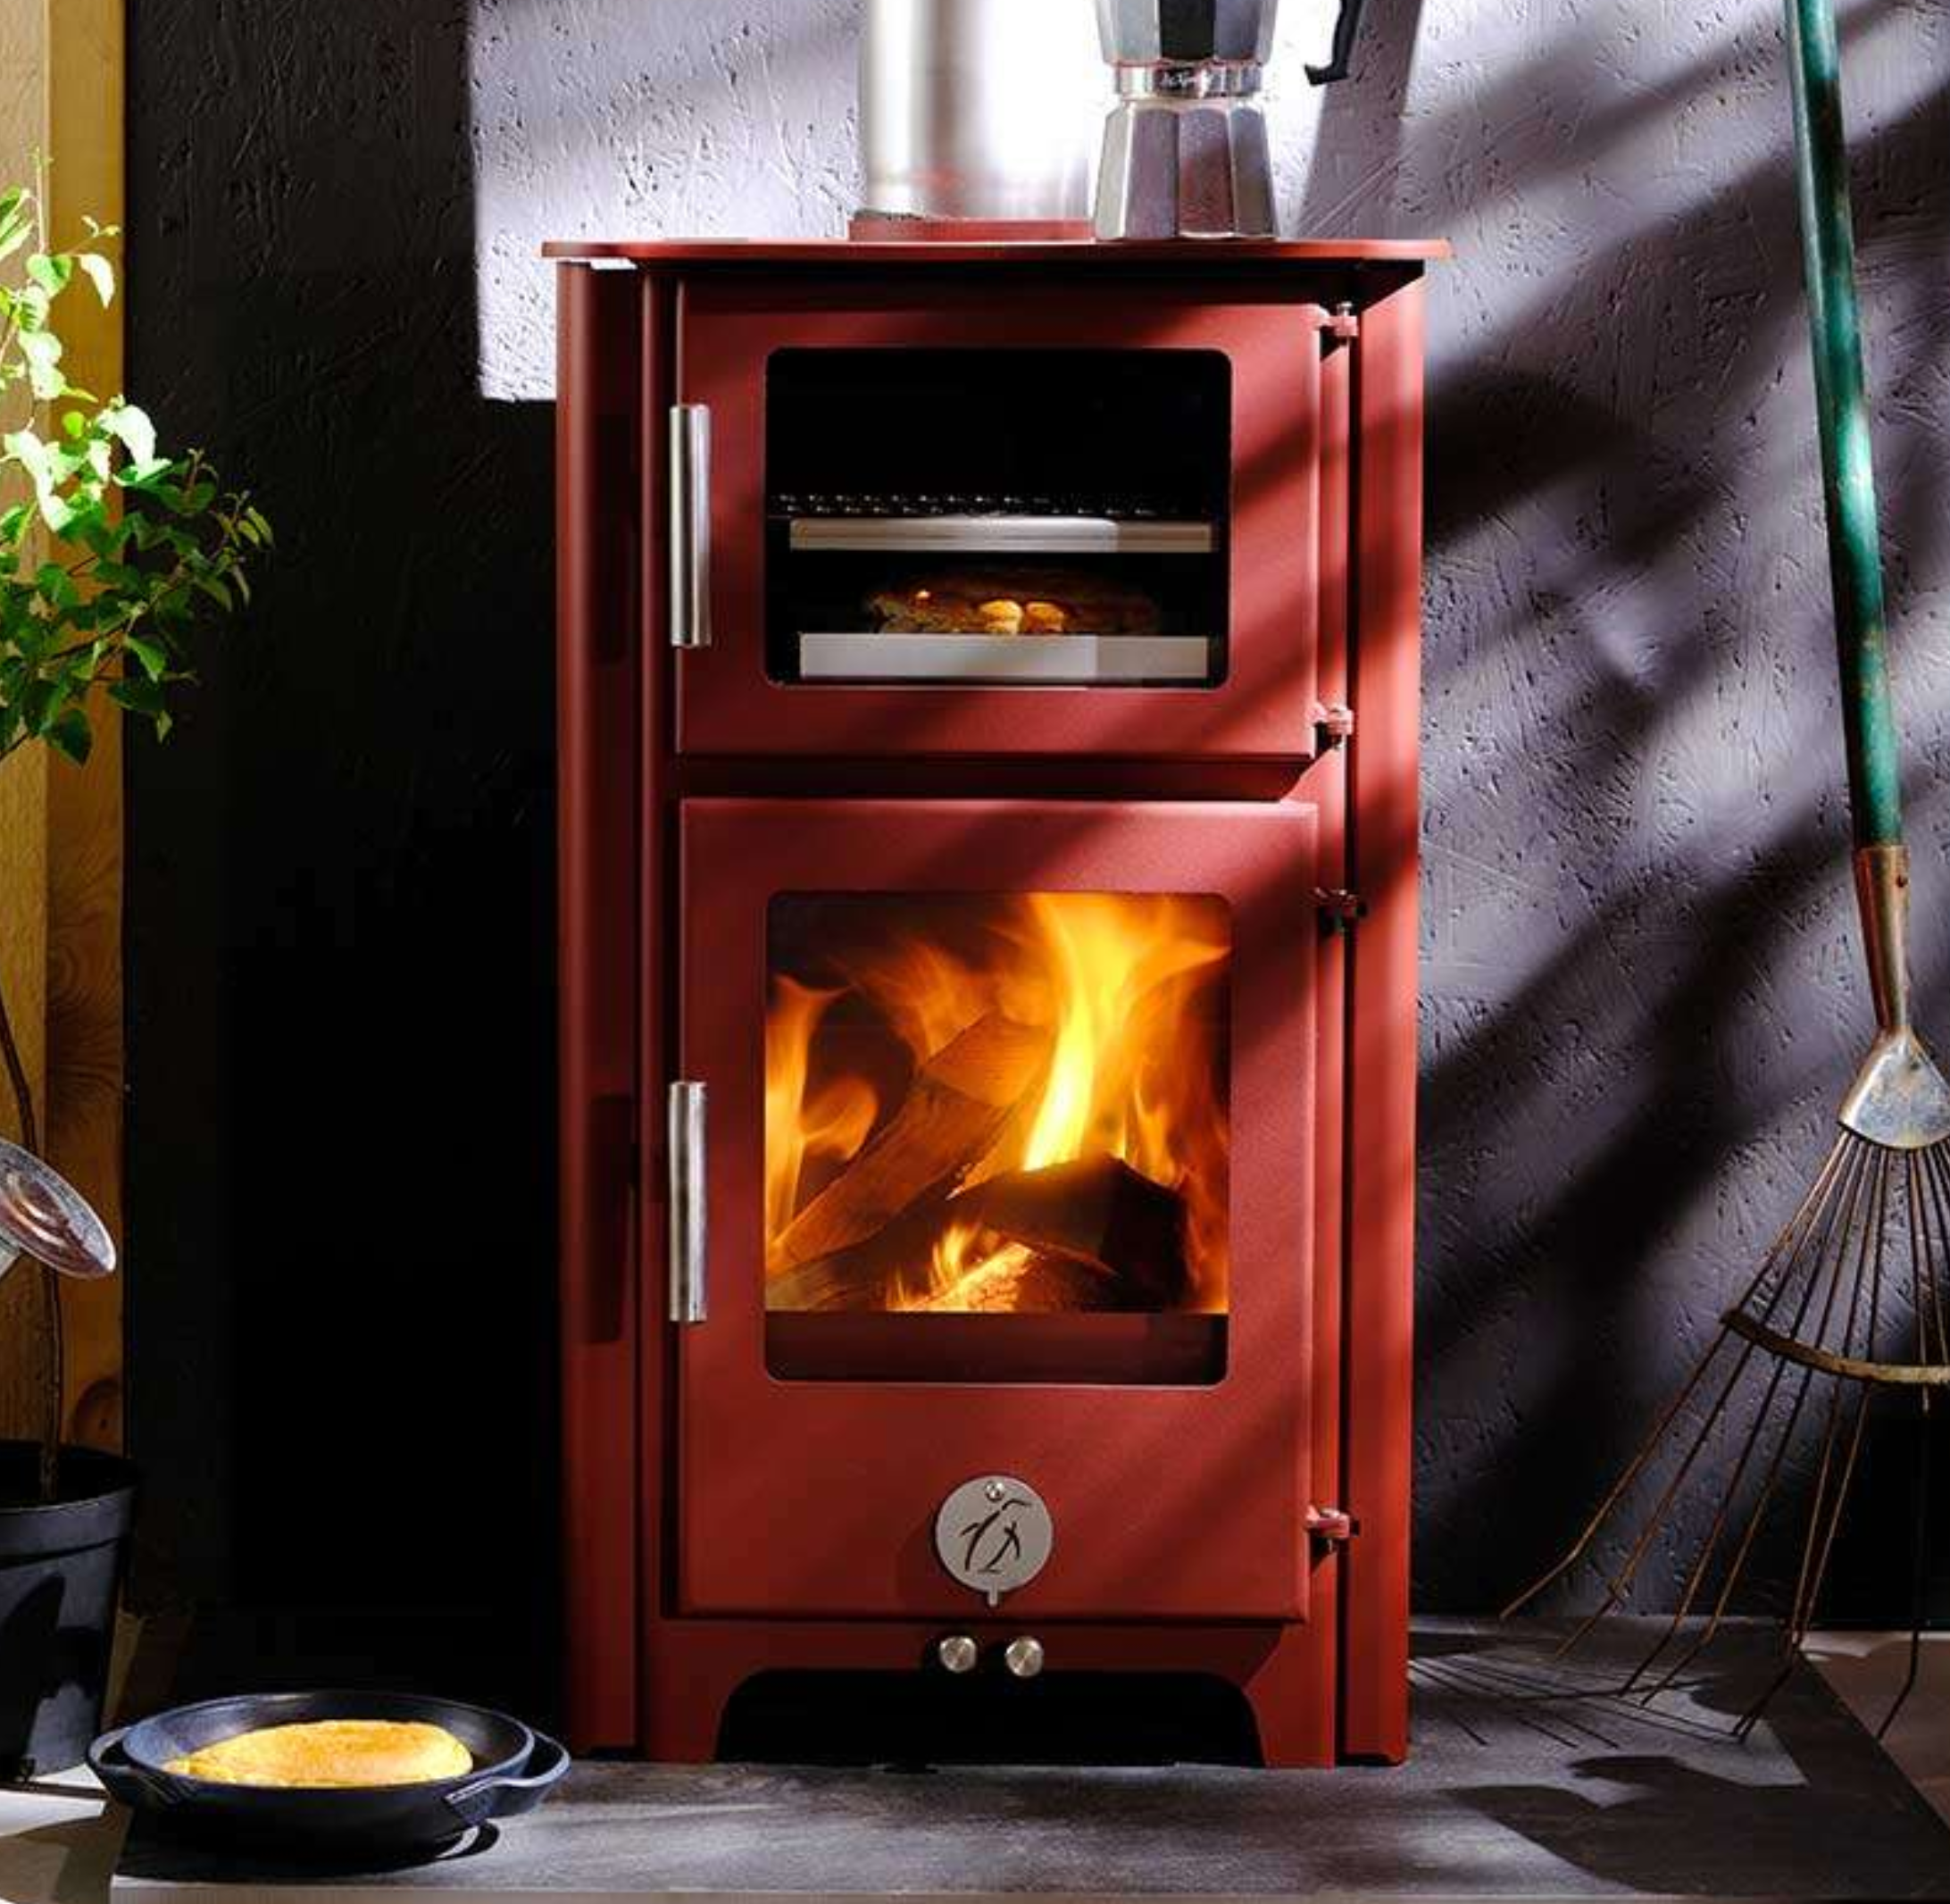 The stove I'm getting